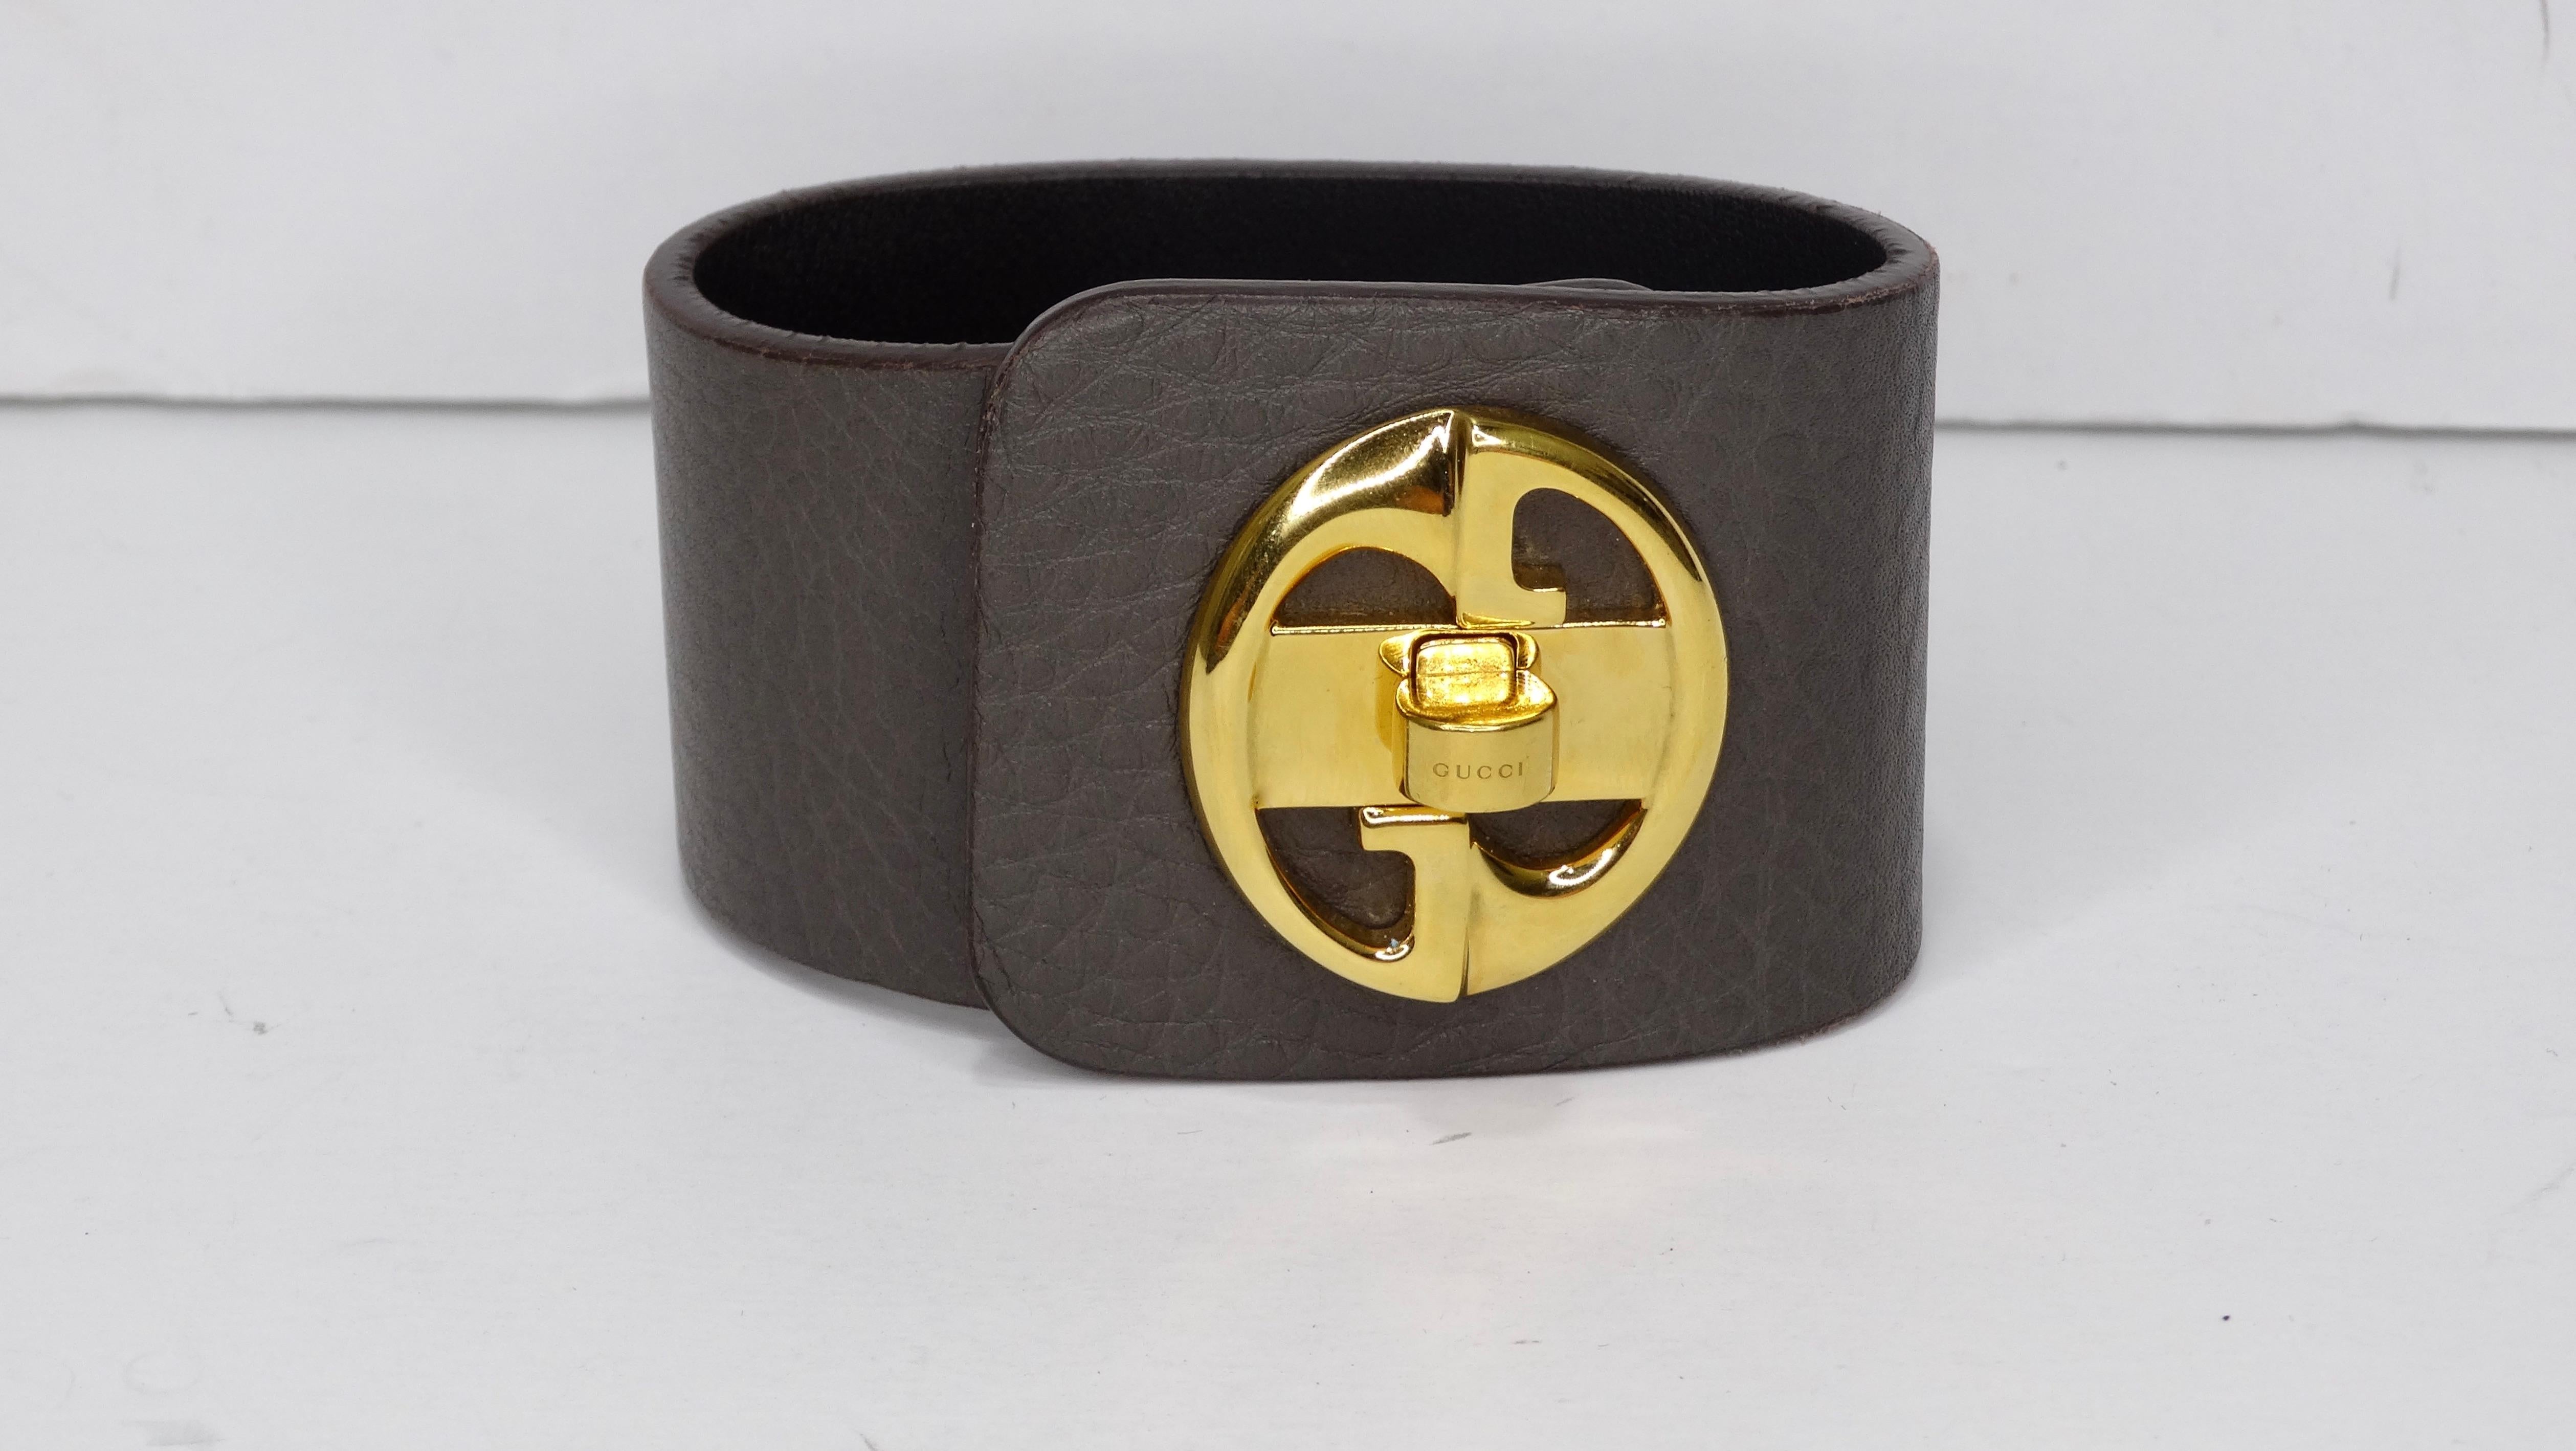 Get this Gucci before it's too late! Circa 1973, this grey leather cuff features a gold toned vintage Gucci logo with a turn lock closure. Stamped on the inside made in Italy. Size is 17 in Italian compares to a US 7 -7 1/2. For all the Gucci